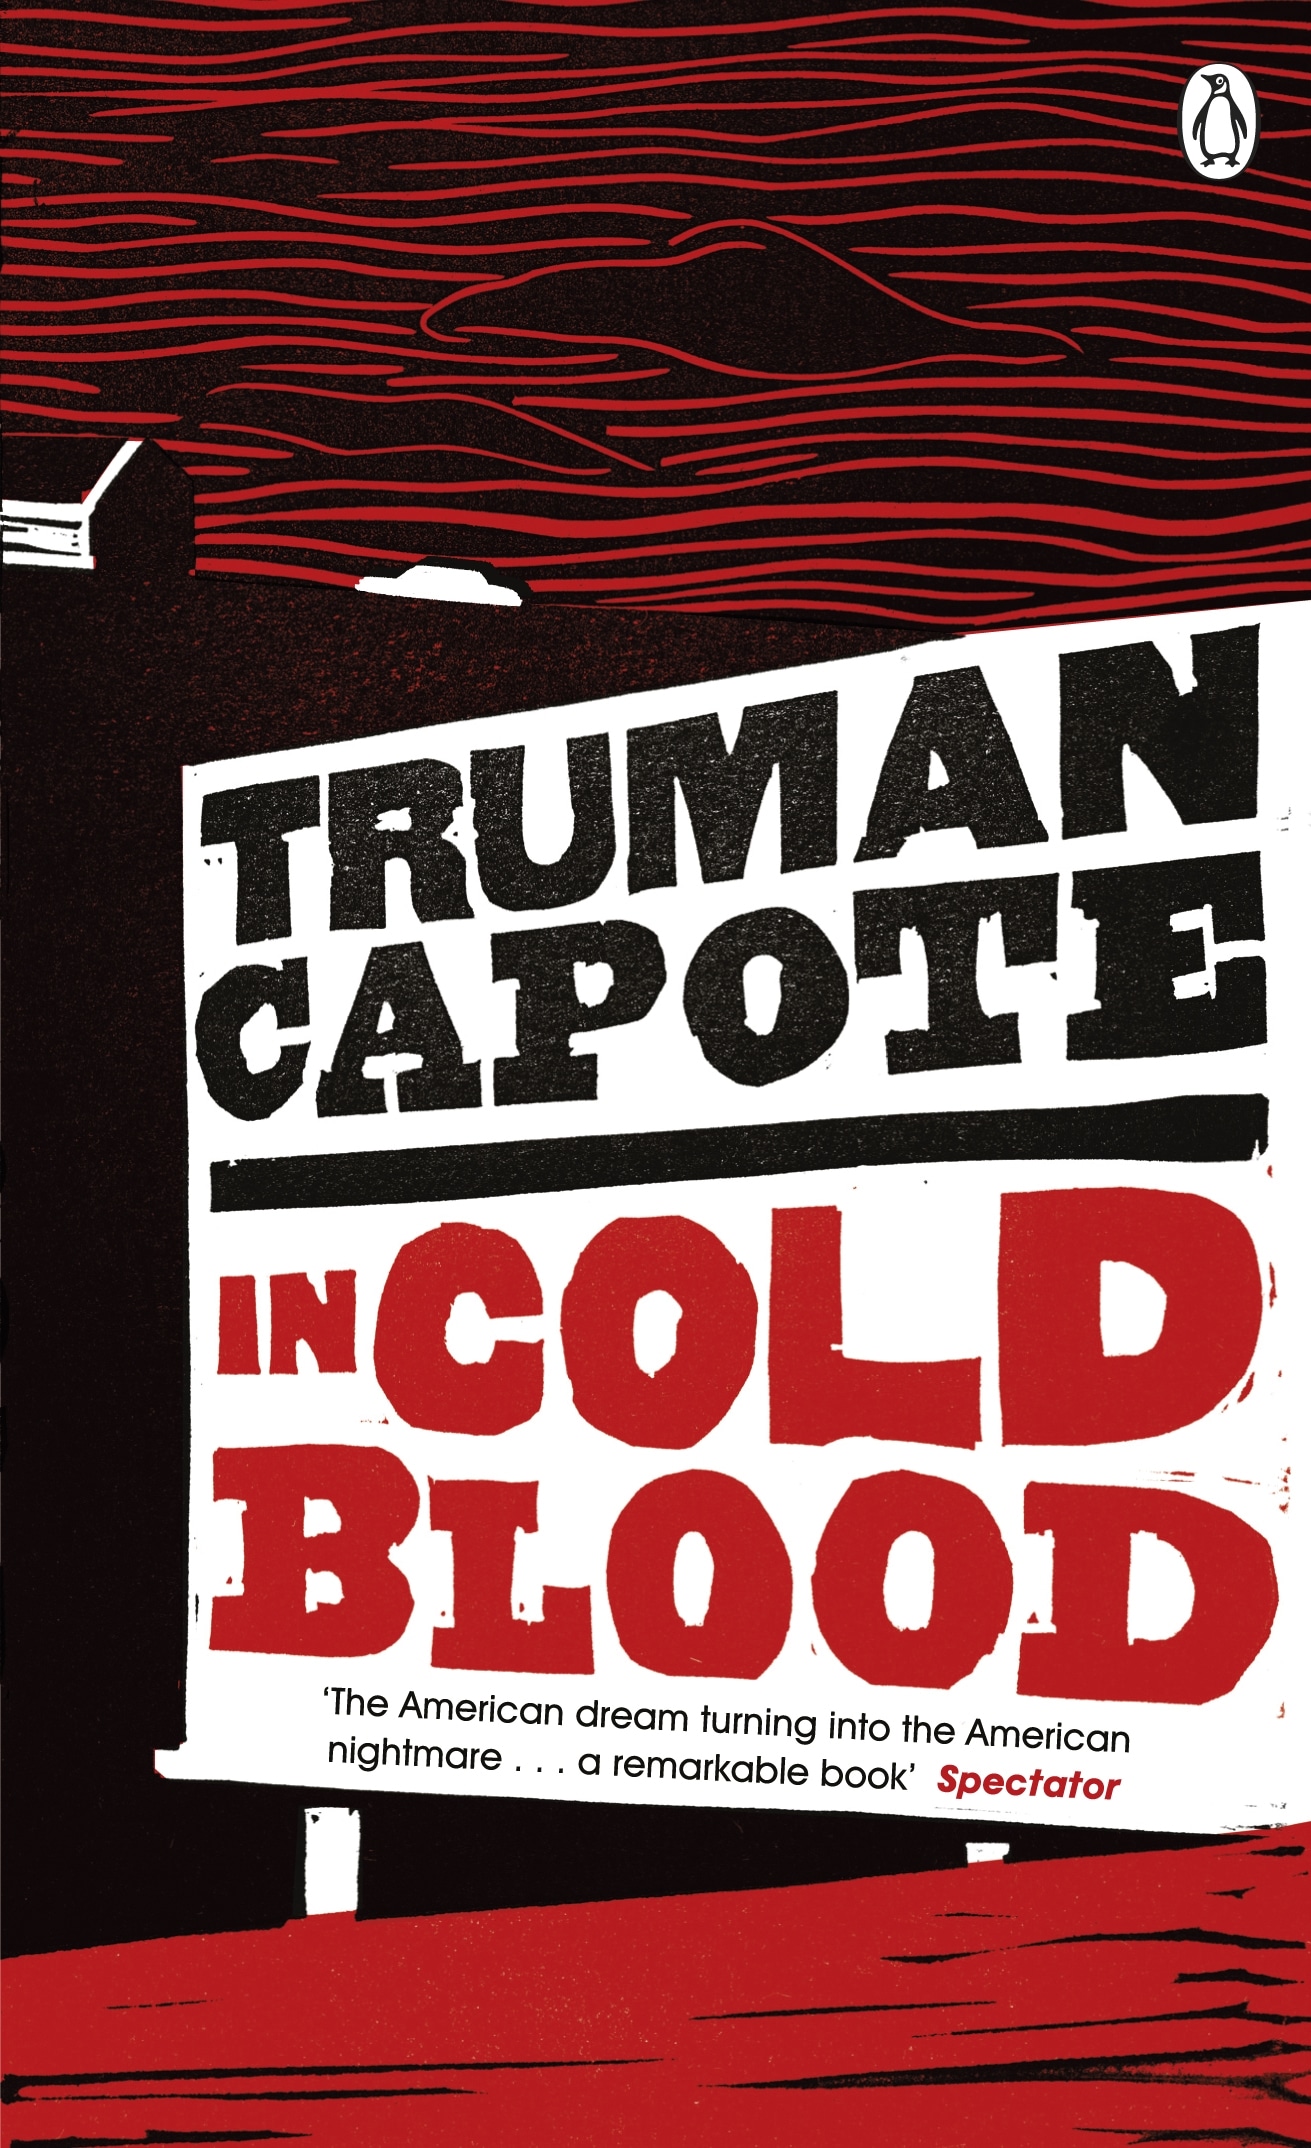 Book “In Cold Blood” by Truman Capote — April 5, 2012